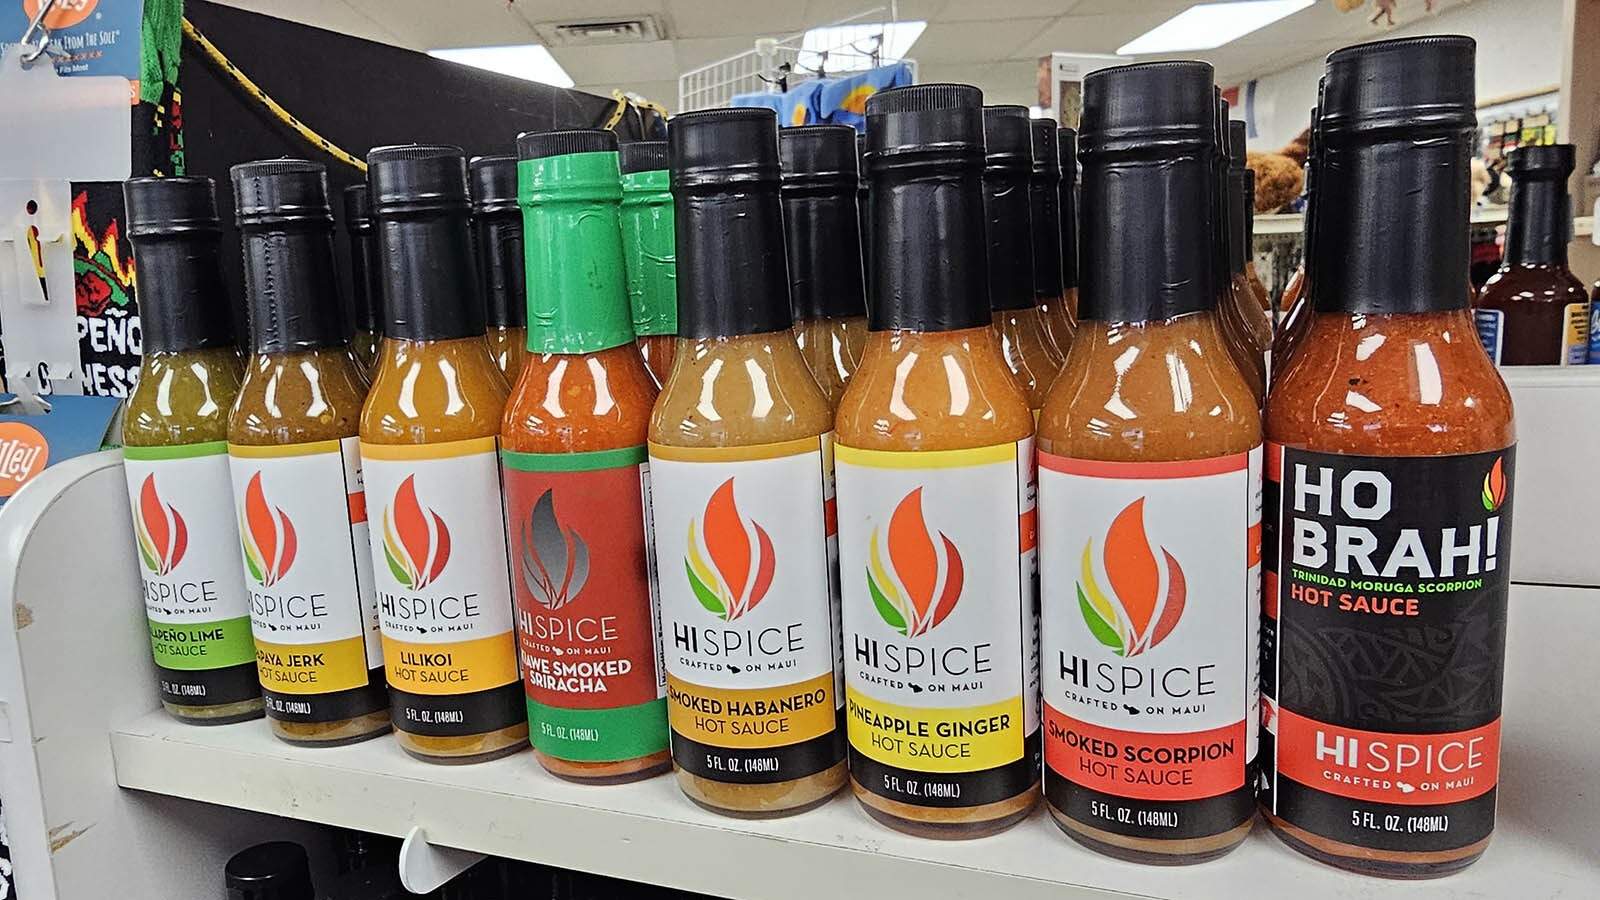 These hot sauces from Hawaii are among the more than 2,000 brands carried by Discover Thermopolis.